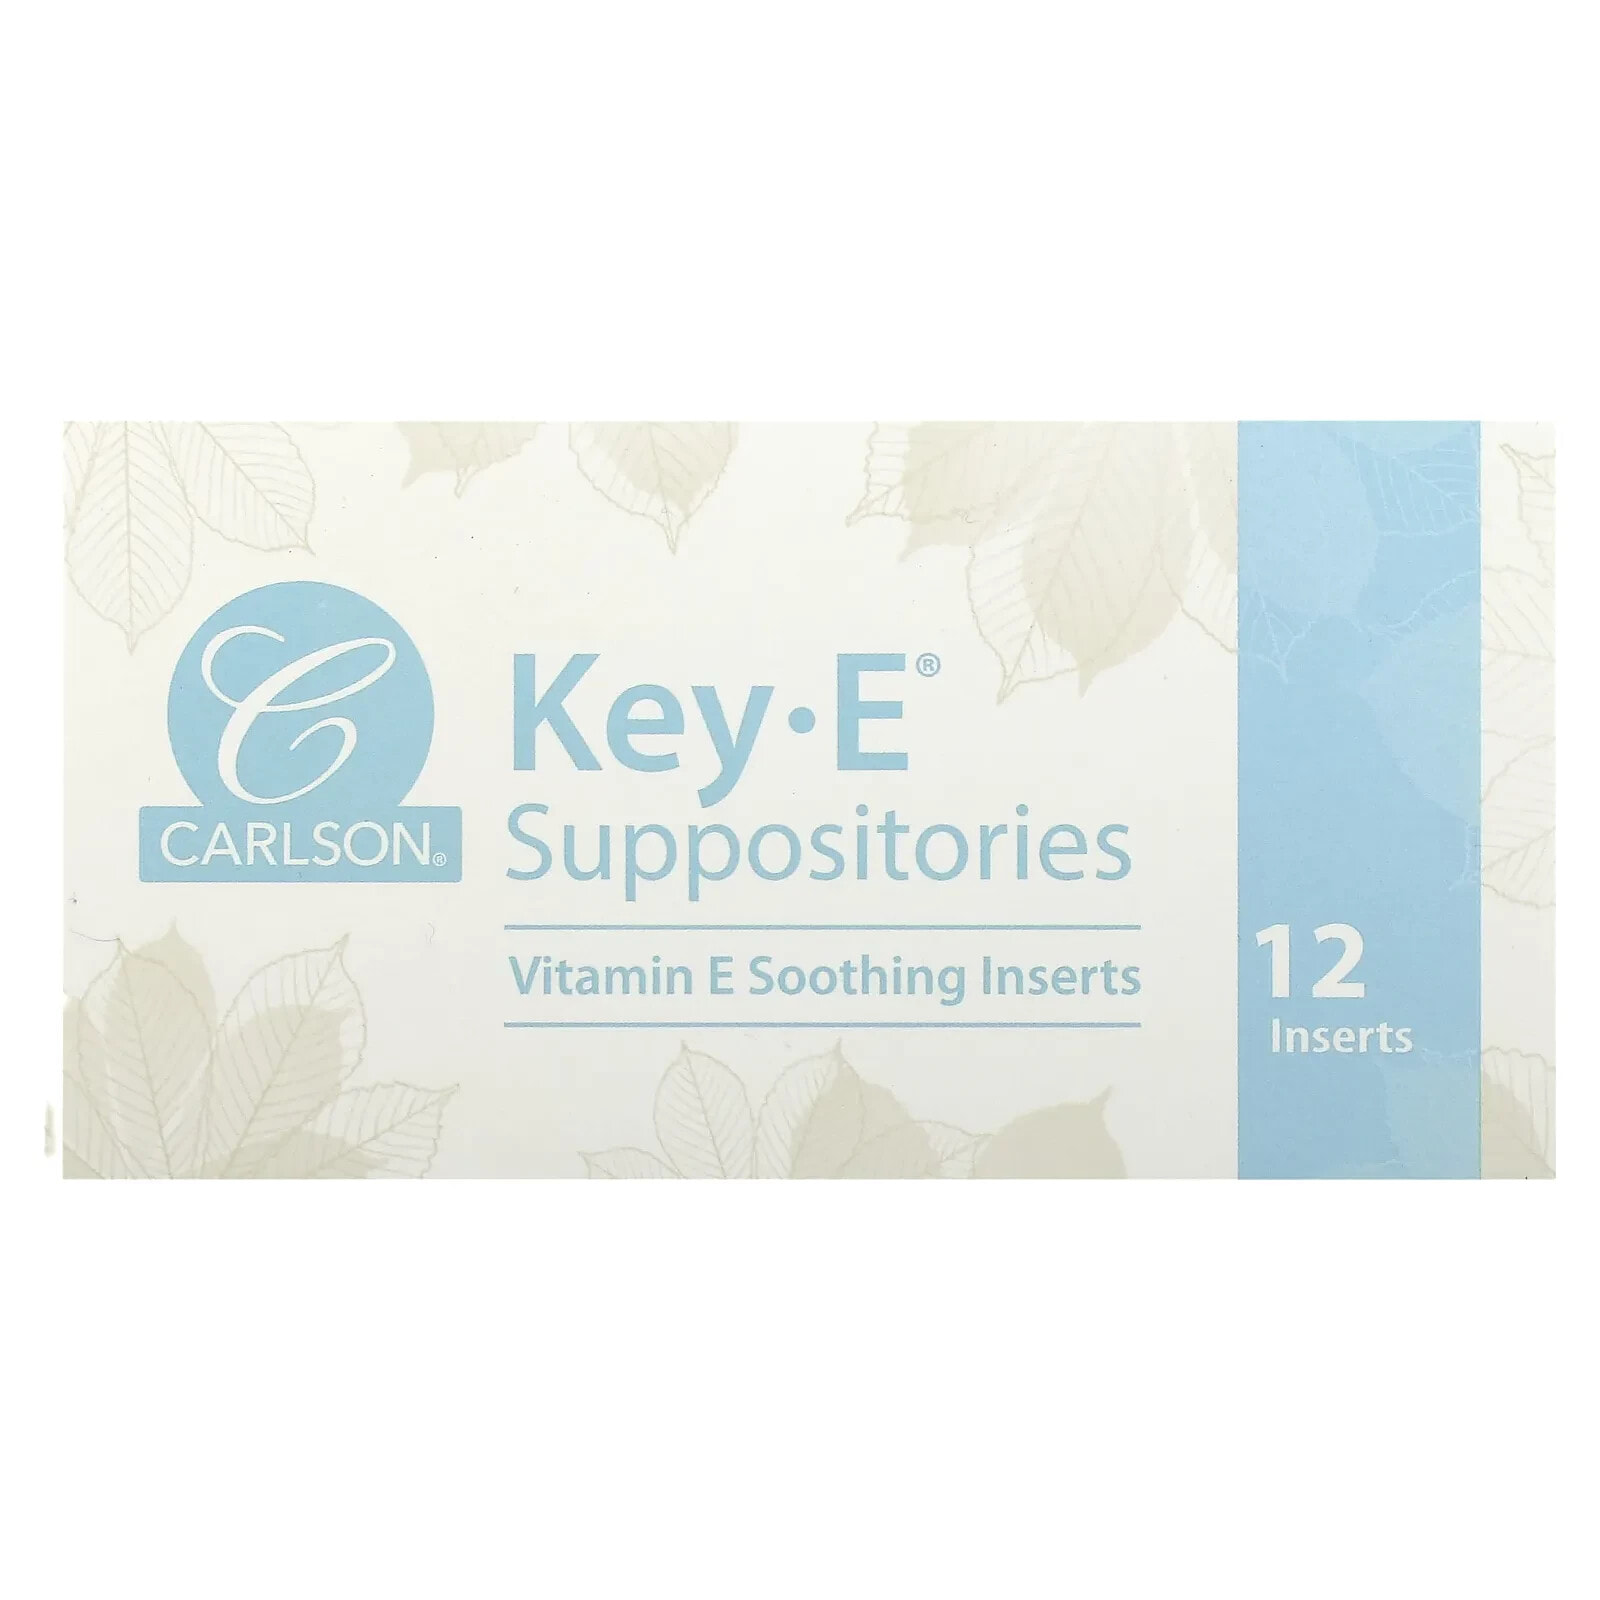 Key-E Suppositories, 24 Inserts